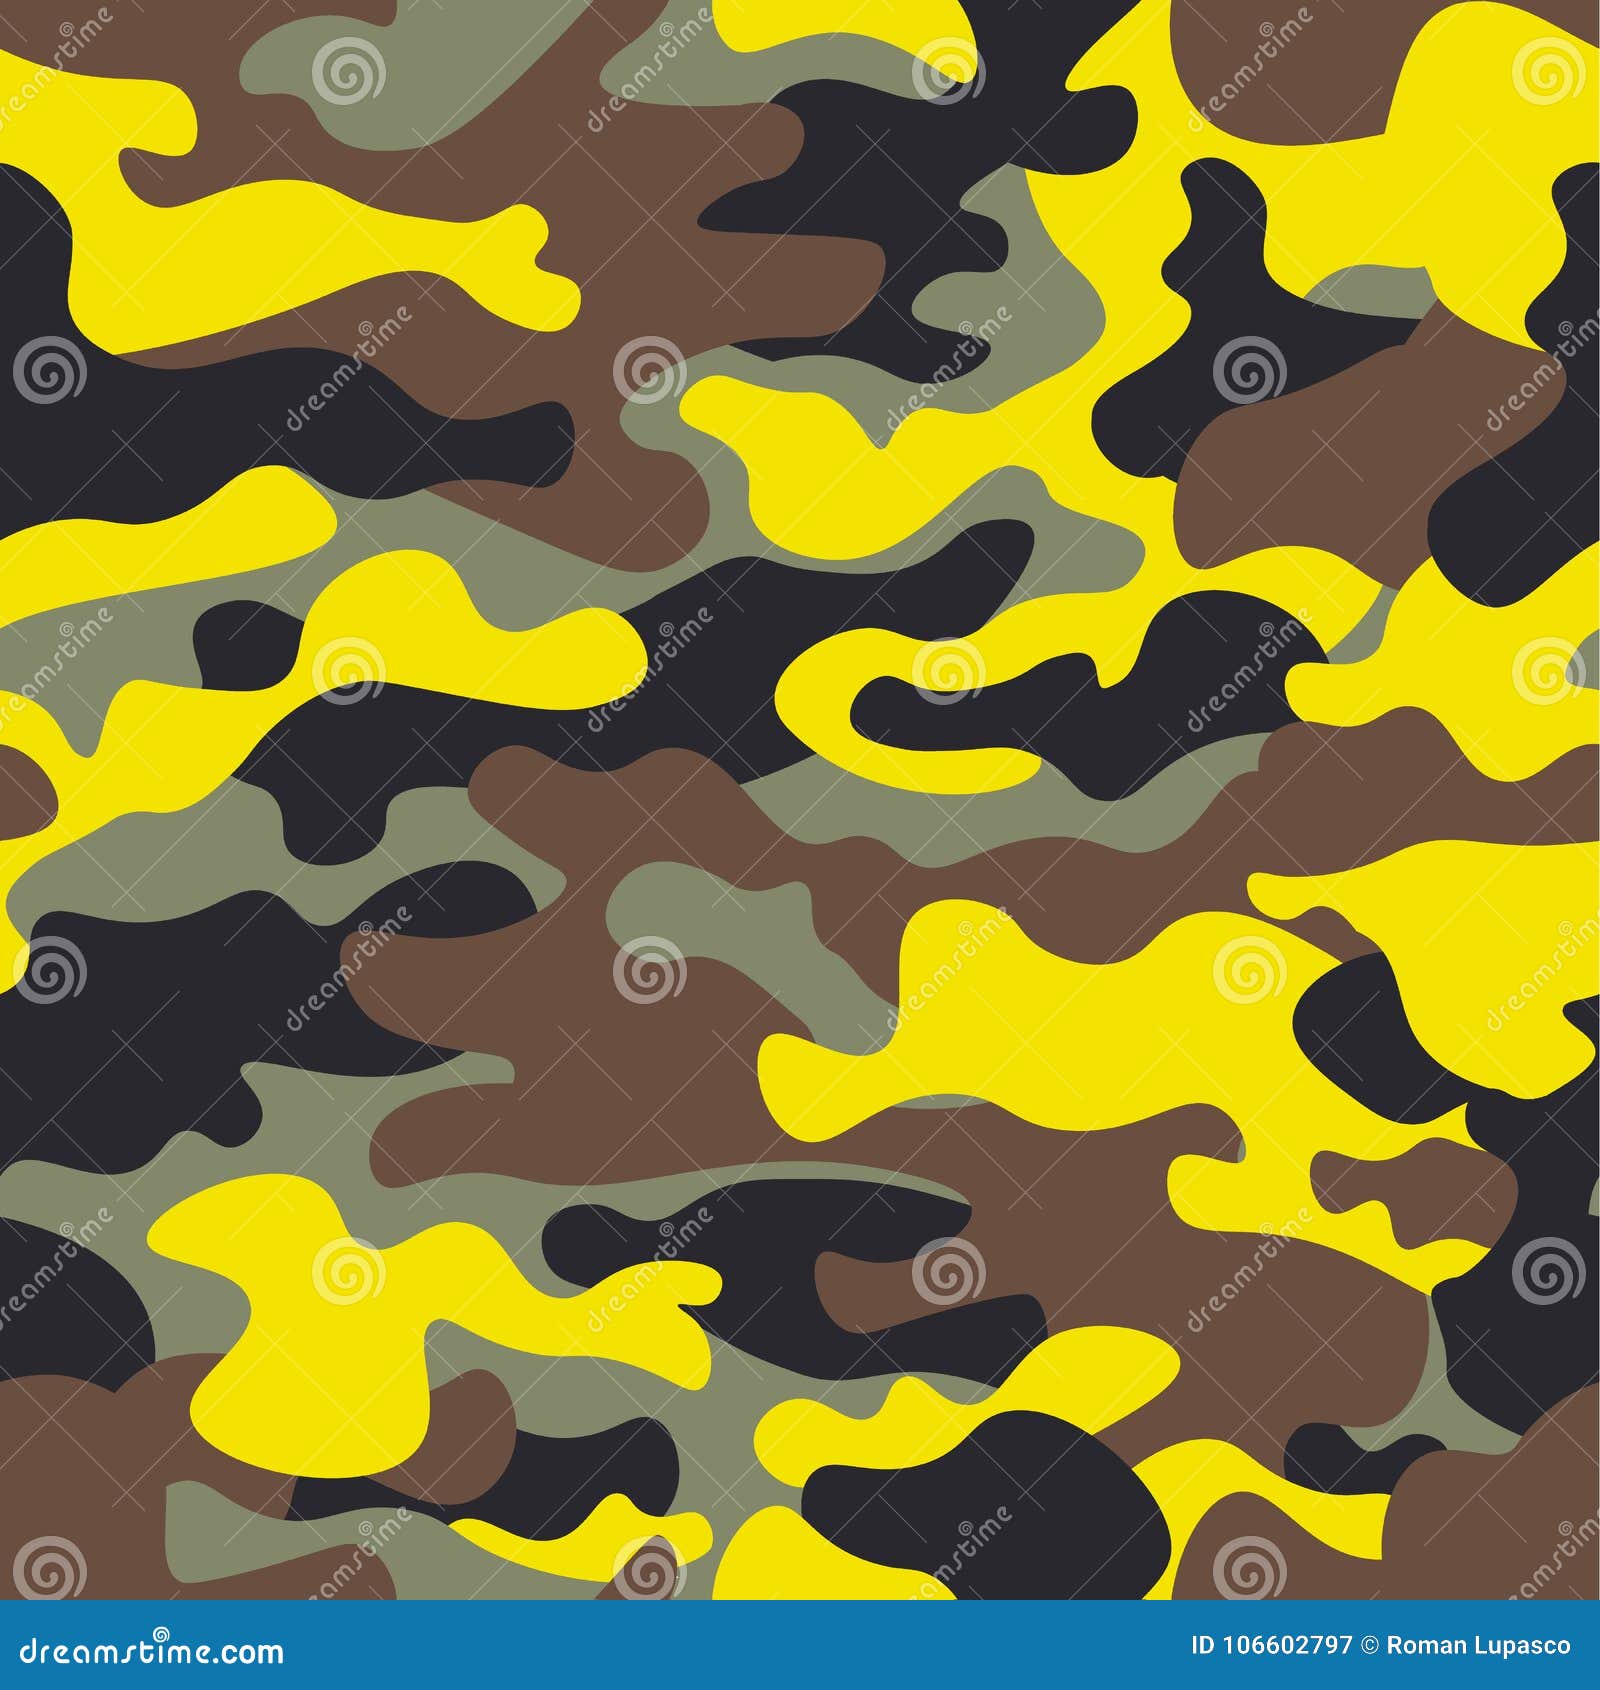 Seamless Fashion Wide Woodland and Yellow Camo Pattern Vector ...